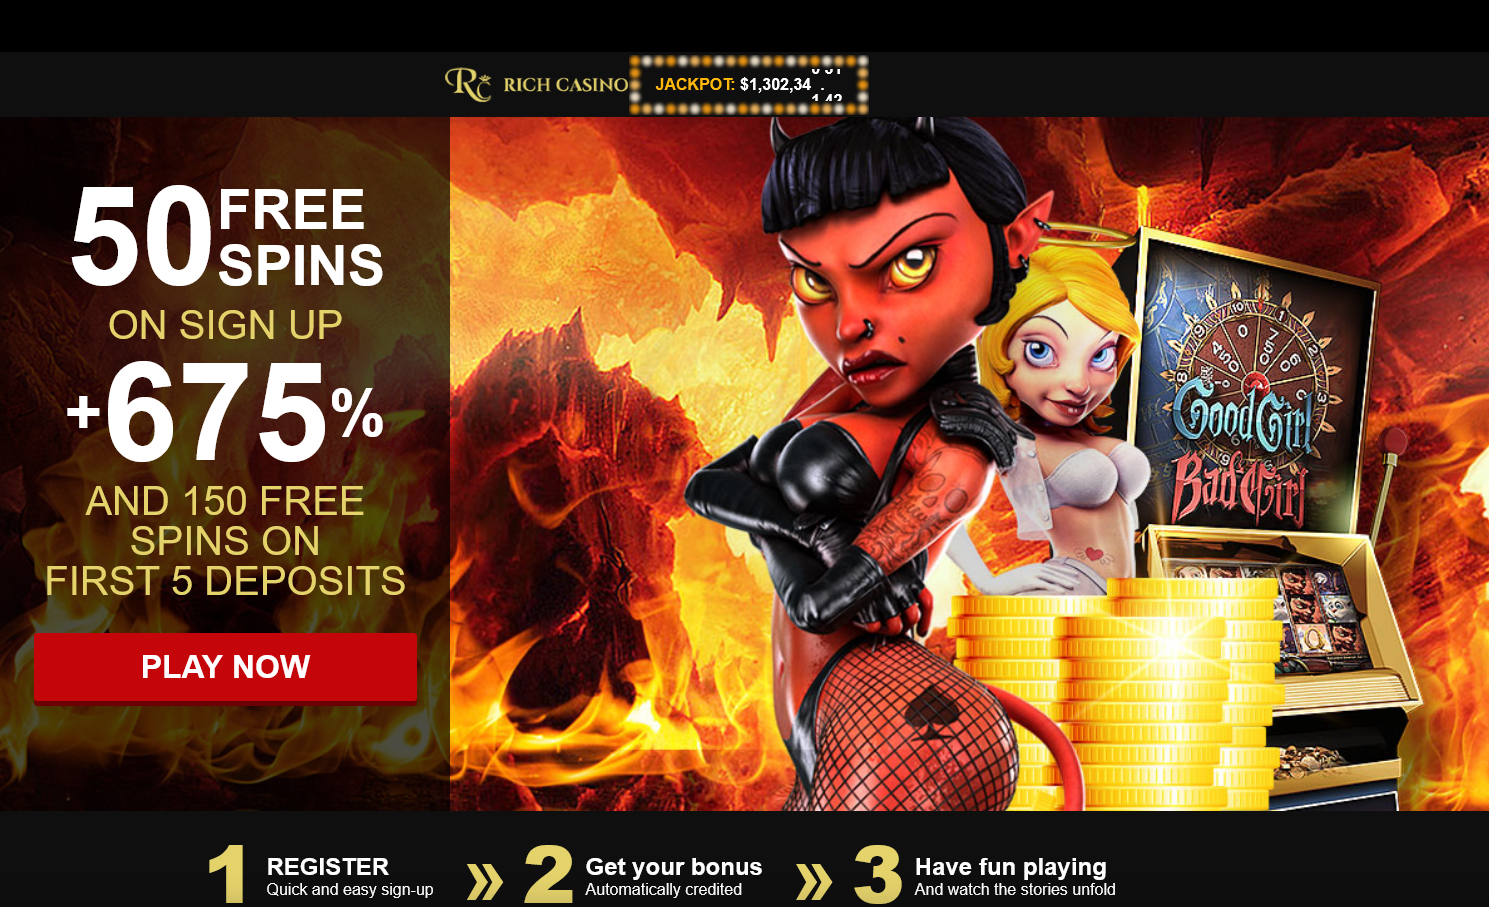 50 FREE SPINS ON SIGN UP + 675 % AND 150 FREE SPINS ON FIRST 5 DEPOSITS